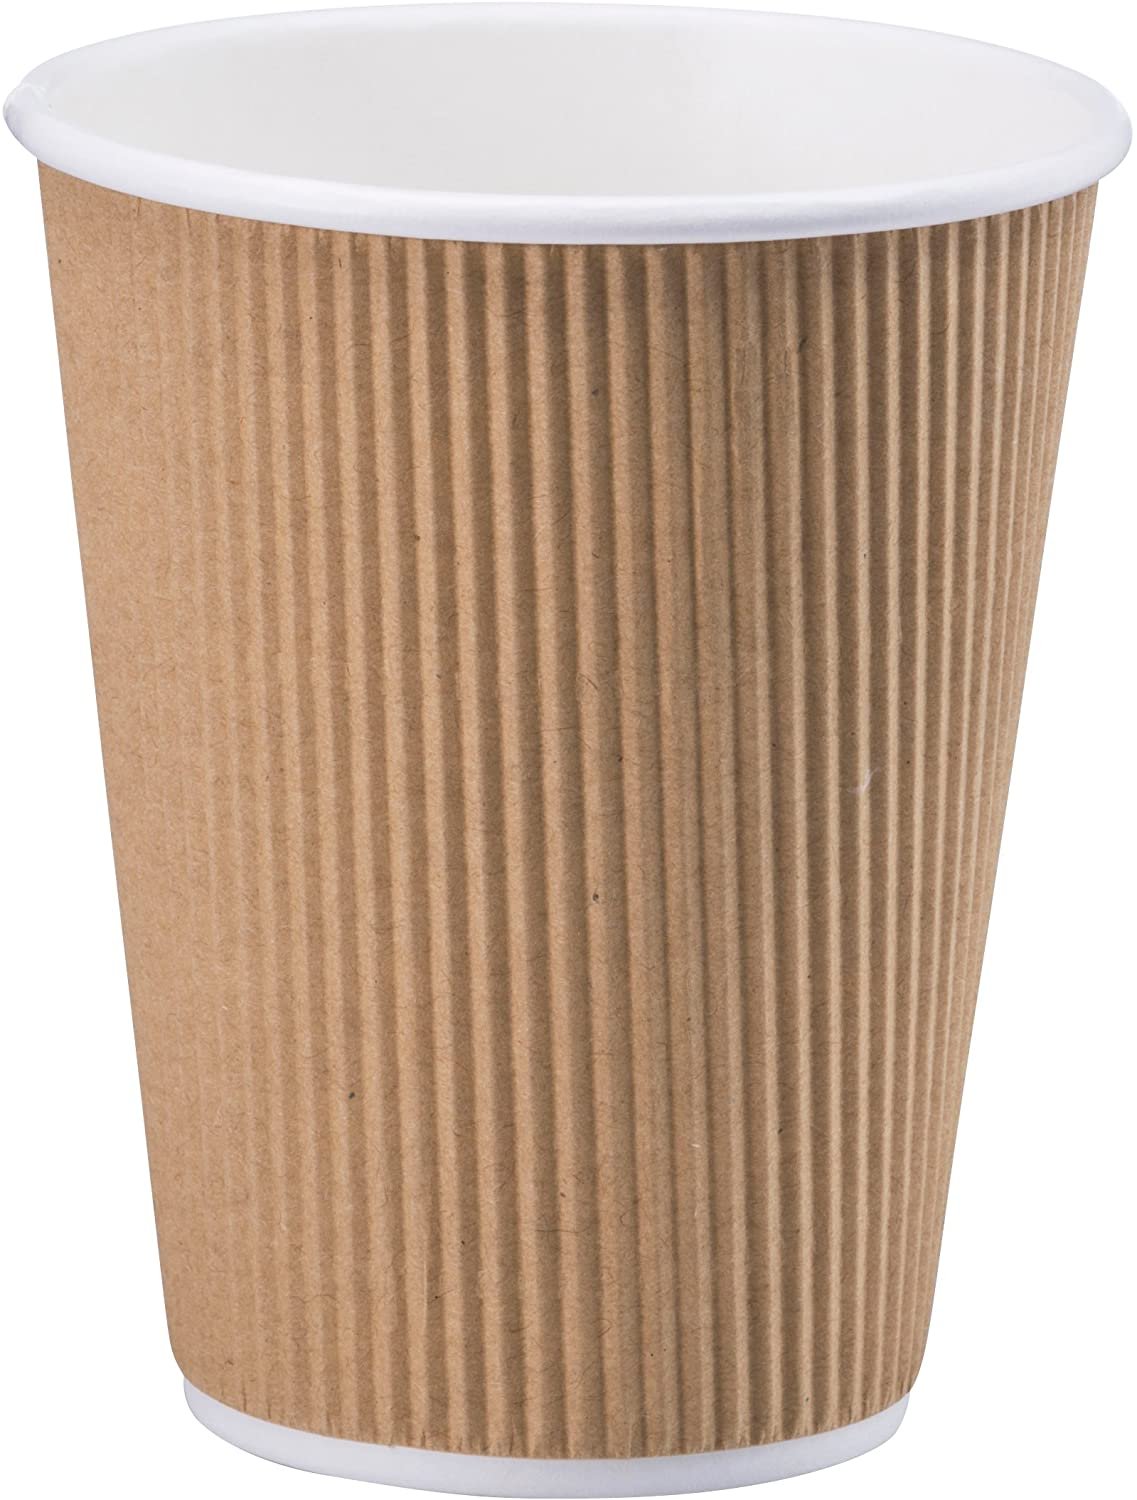 NYHI Set of 100 Brown Disposable Paper Cups with White Lids (10-oz) | Ripple Insulated Kraft for Hot Drinks - Tea & Coffee | Triple Layer Design | Eco- Friendly, Recyclable, Durable Paper - NY-HI